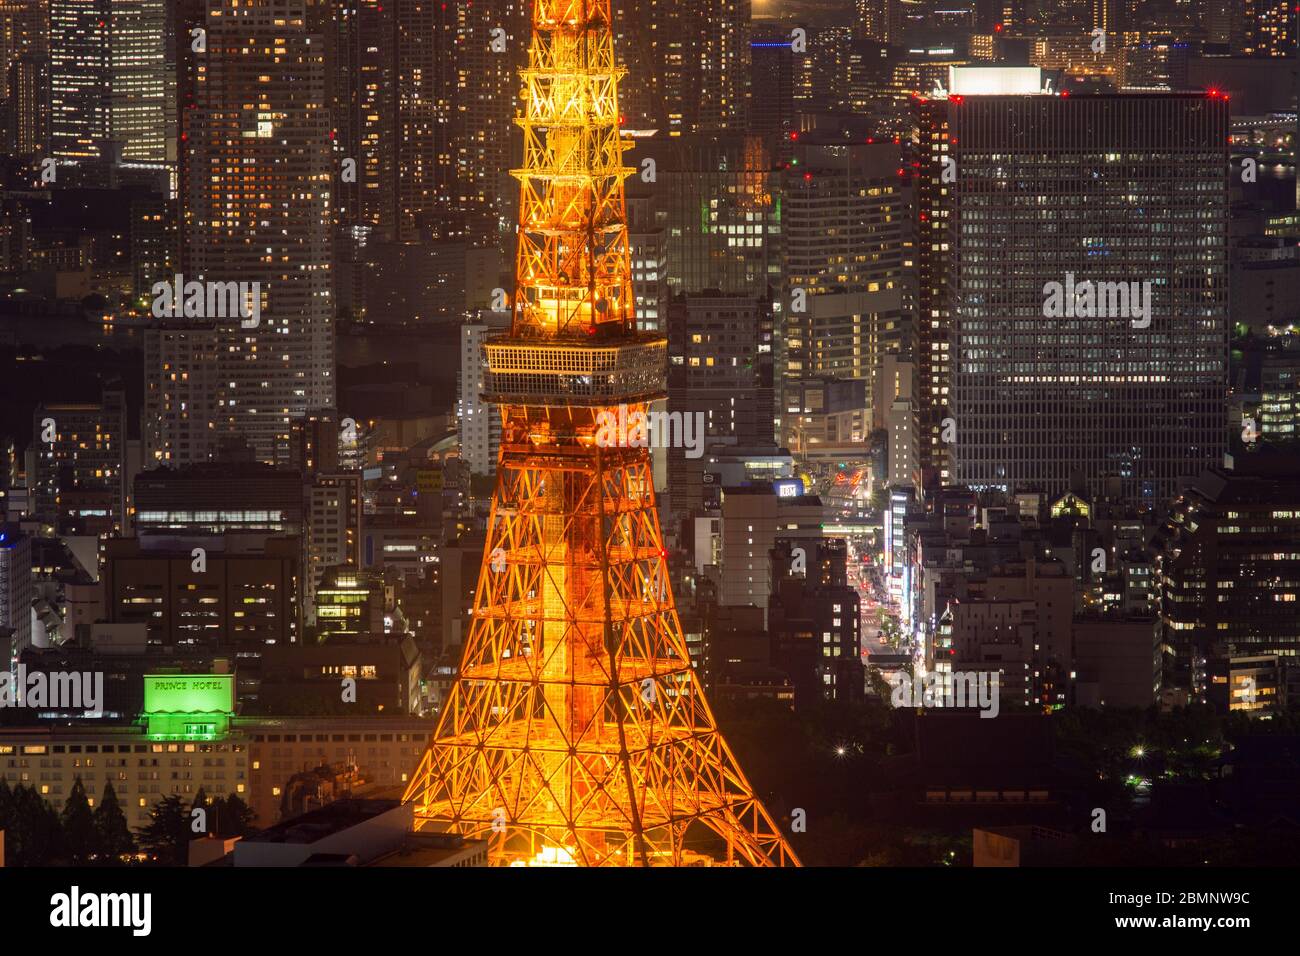 Tokyo / Japan - April 20, 2018: Tokyo Tower and Tokyo cityscape at night, view from the Roppongi Hills Mori Tower Stock Photo